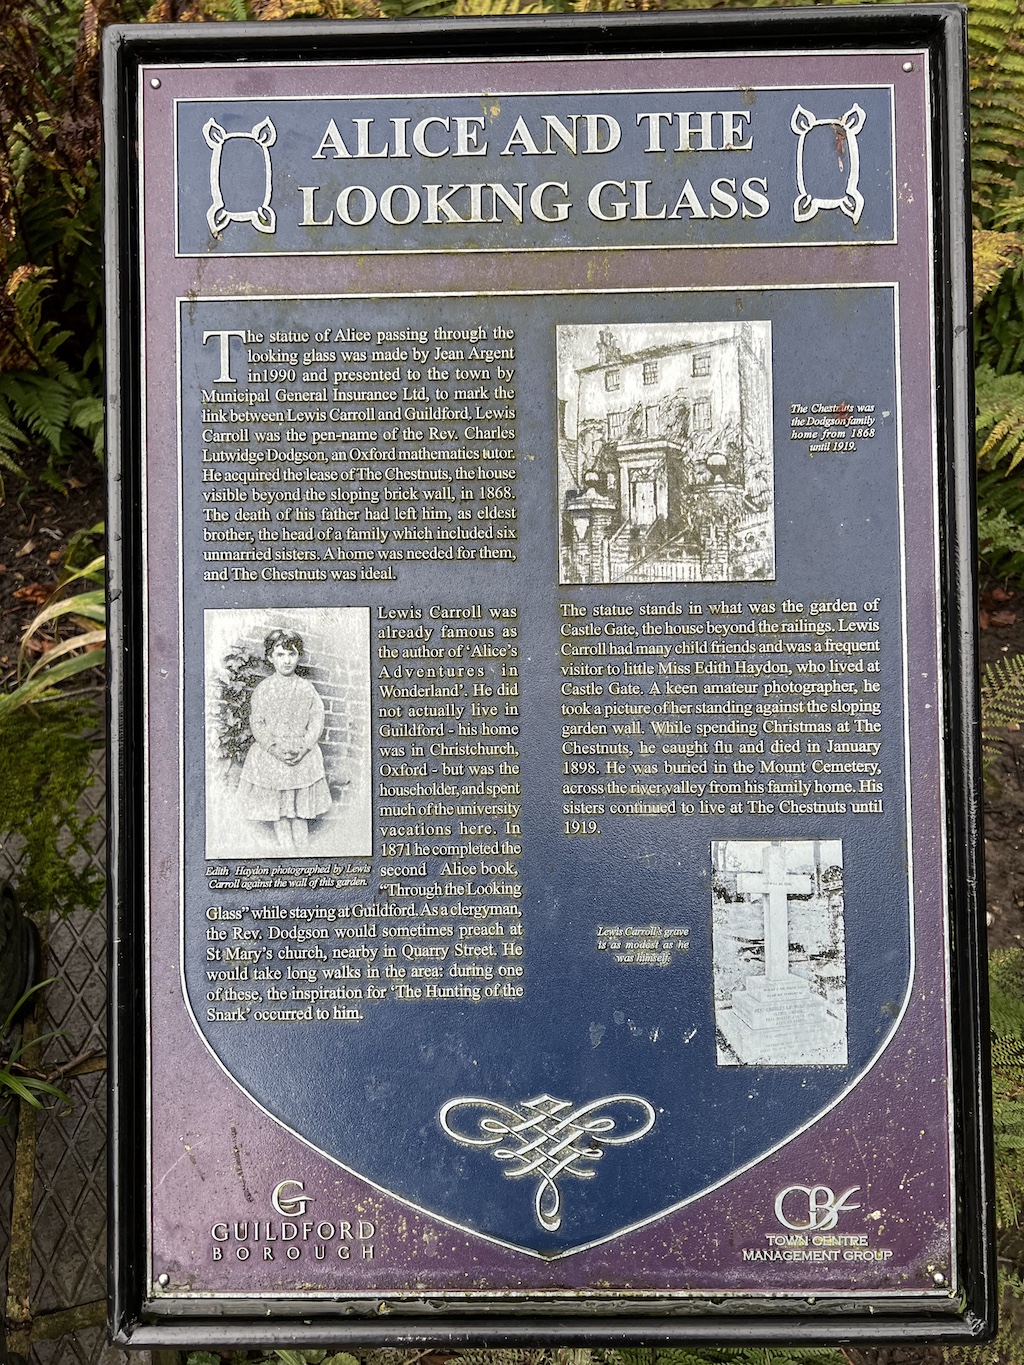 Blue plaque in Guildford for Alice and the looking glass